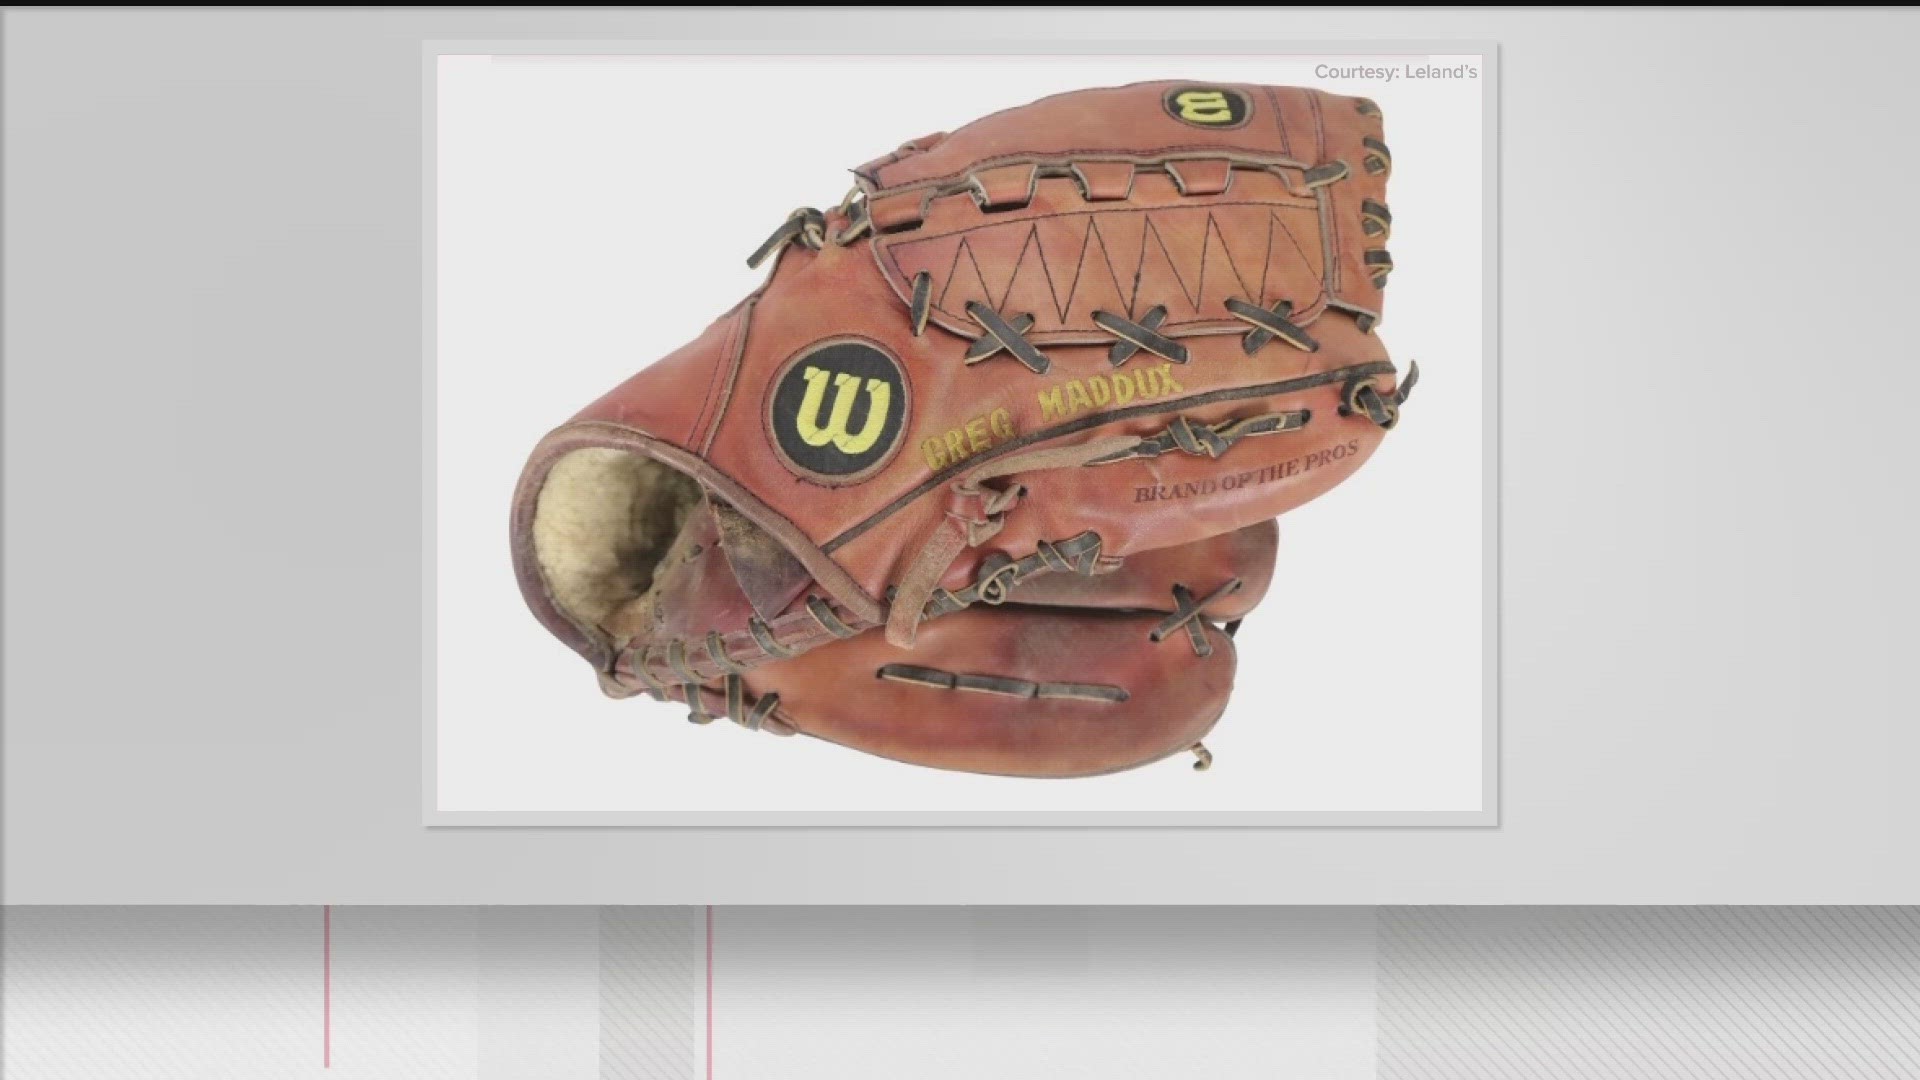 Leland's Auction House sold off the glove used by the Braves pitching great in the 1995 World Series.